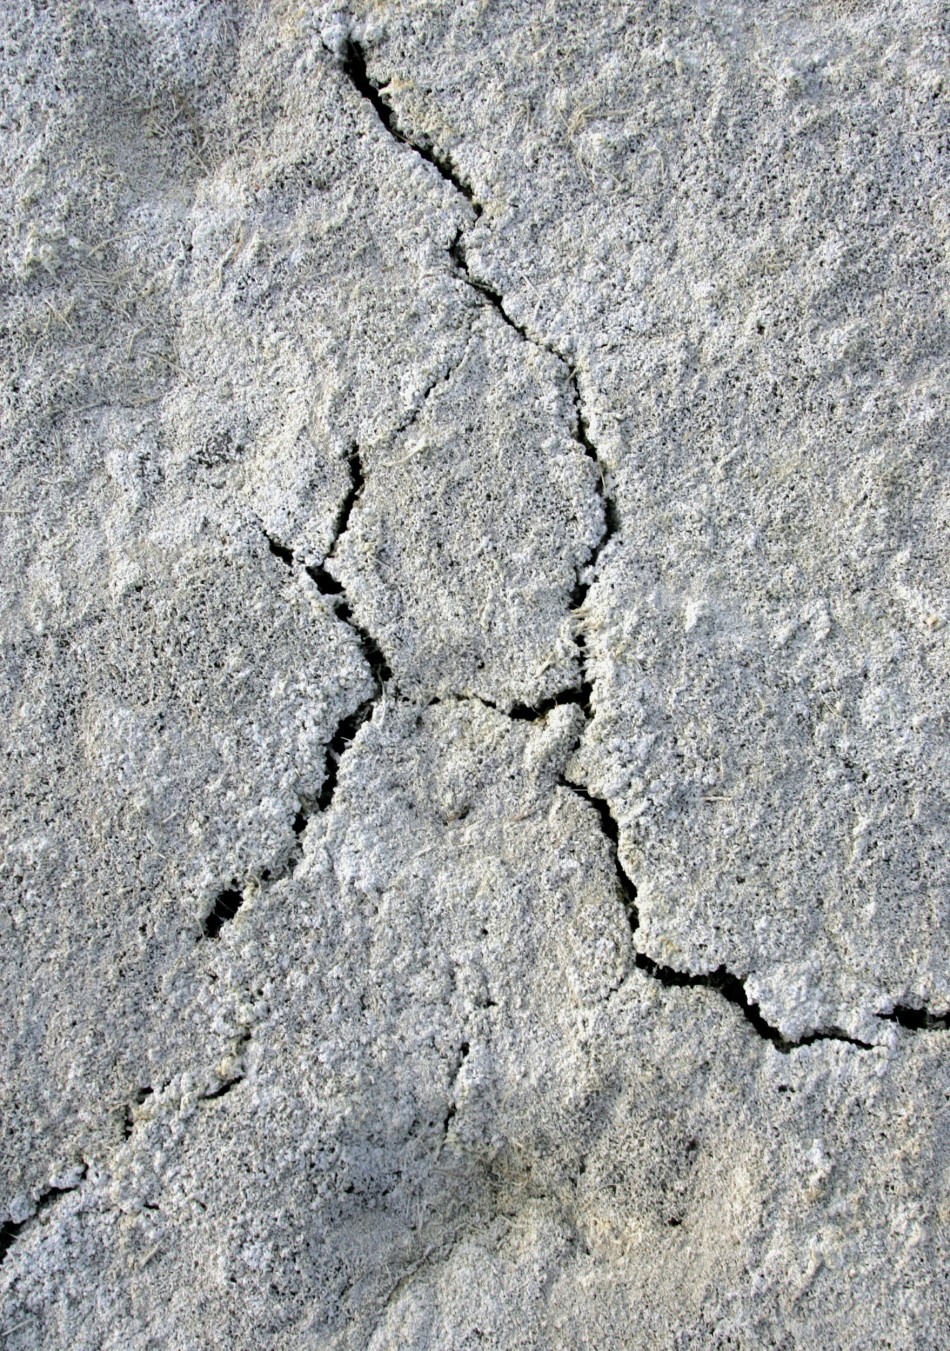 A close-up of the dry and salted soil of the Aral sea near the village of Karateren, southwestern Kazakhstan